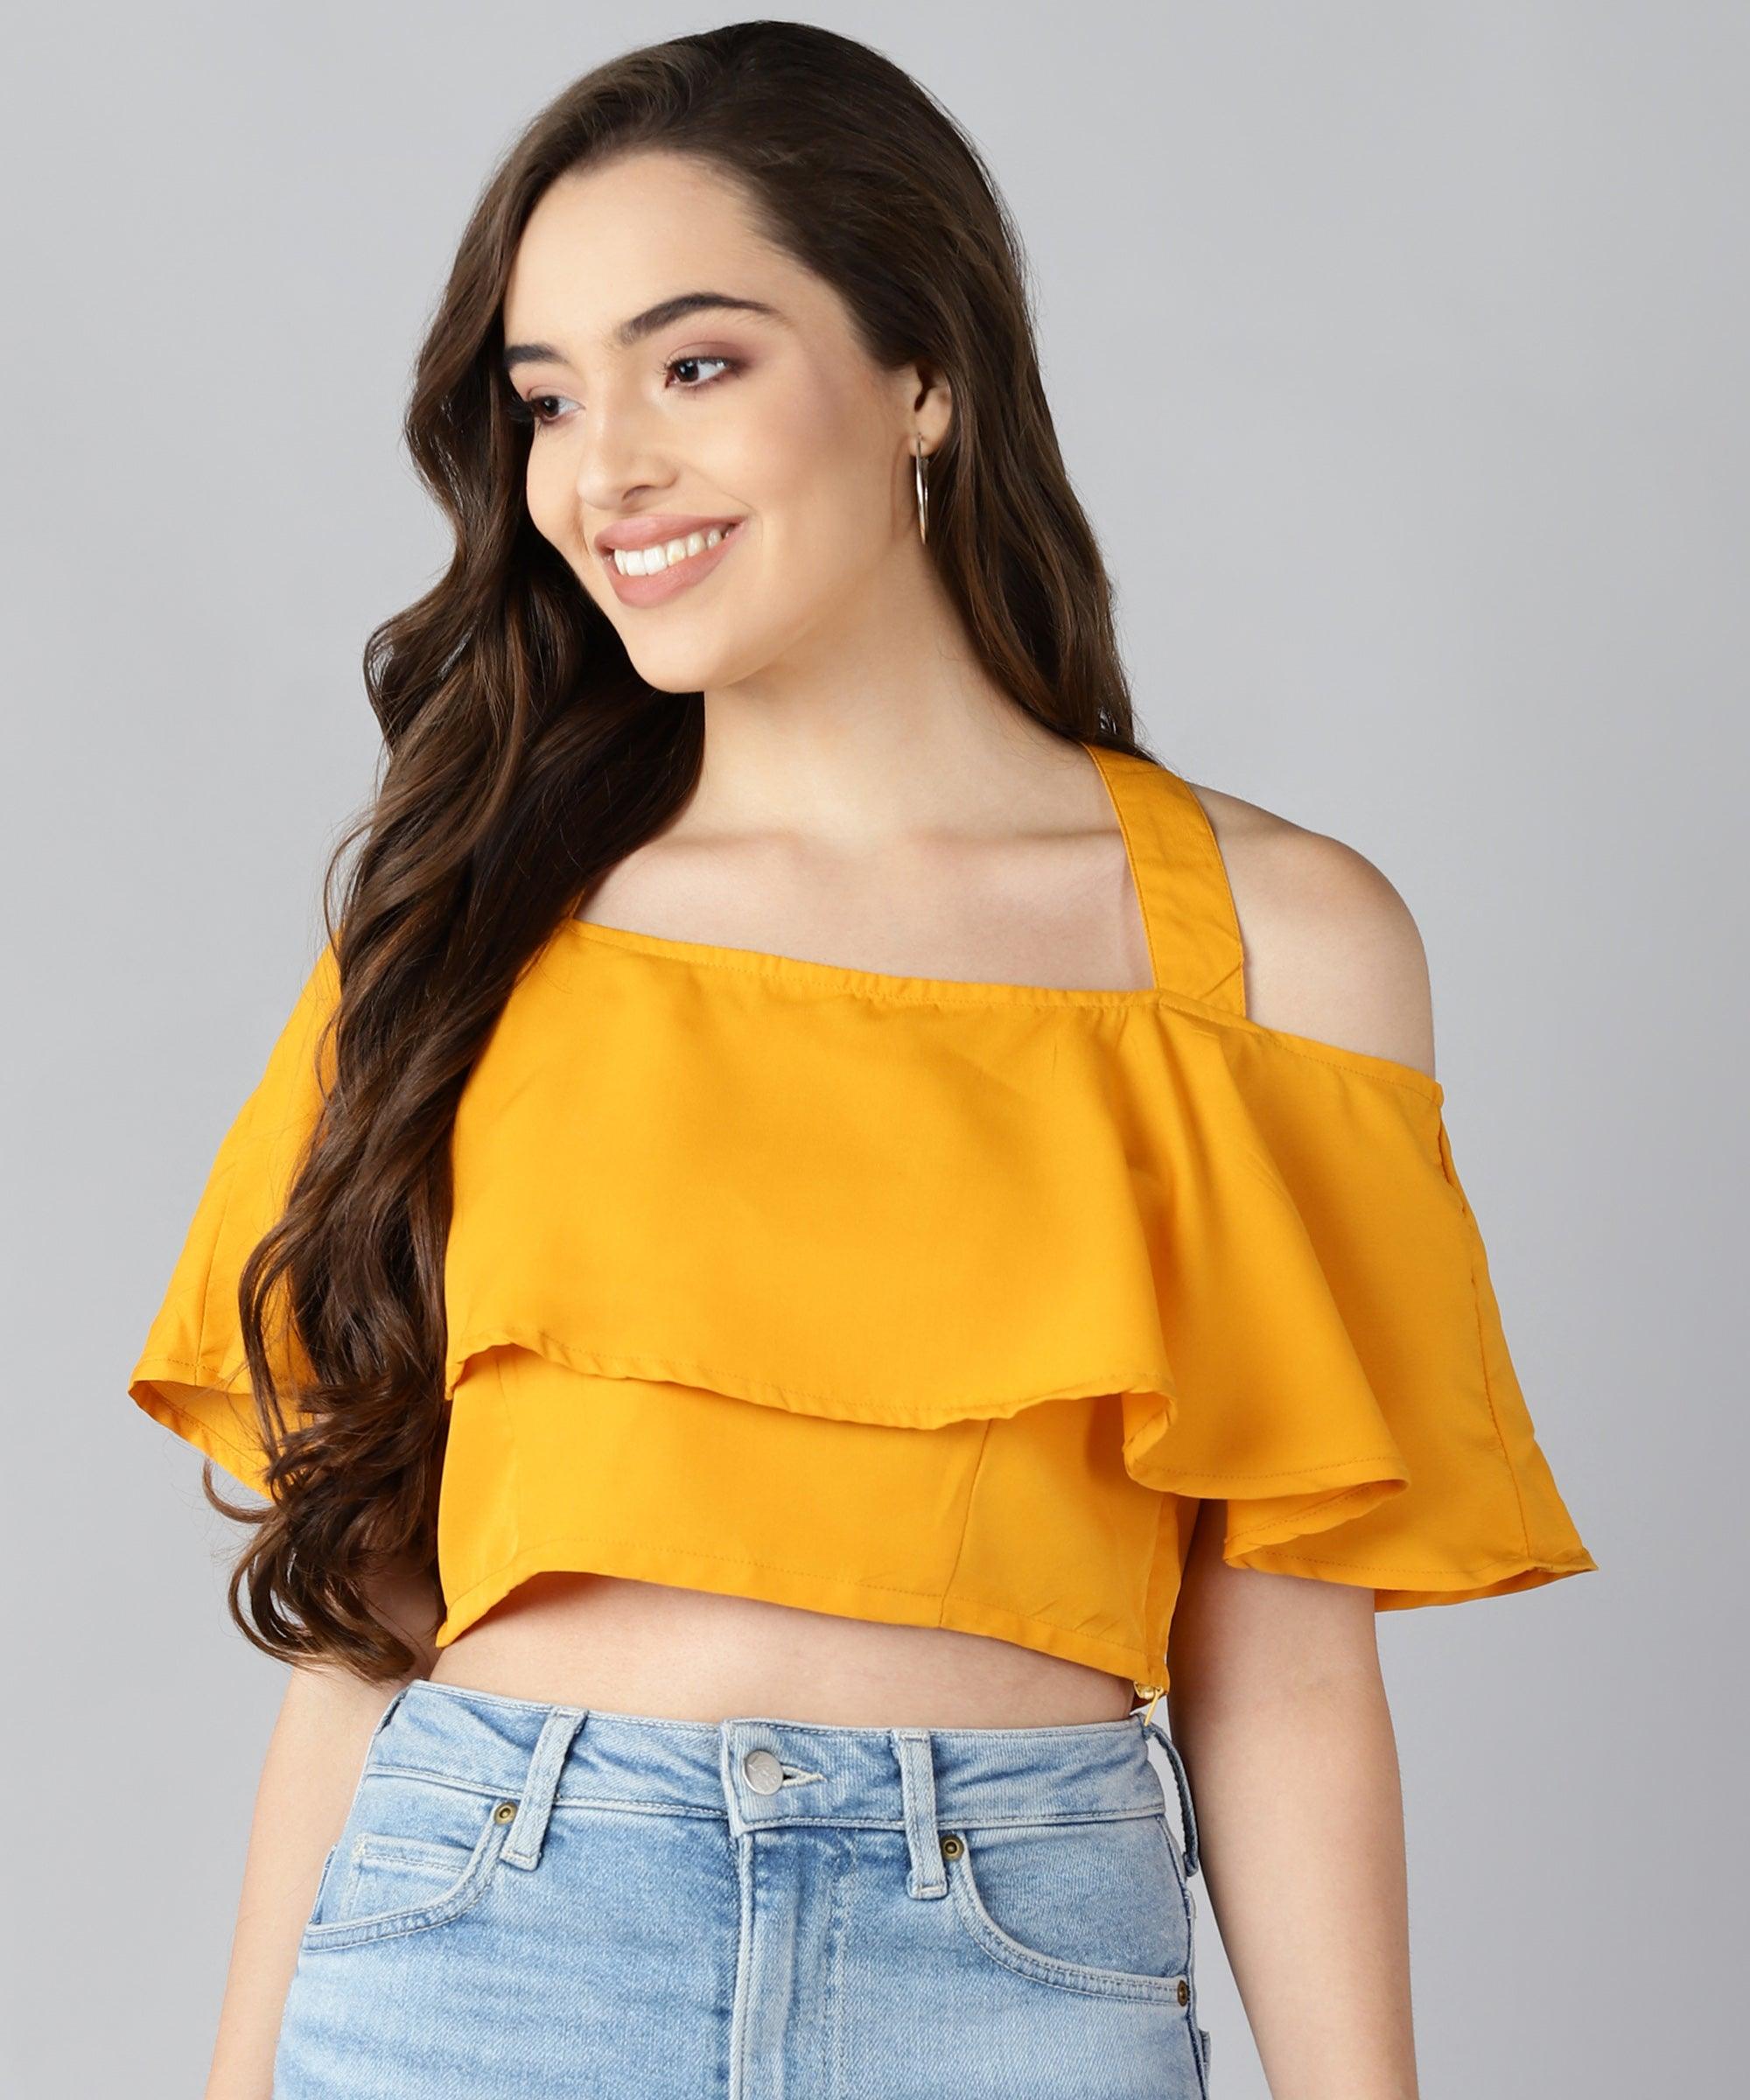 Women Shoulder Straps Yellow Solid Top - Znxclothing